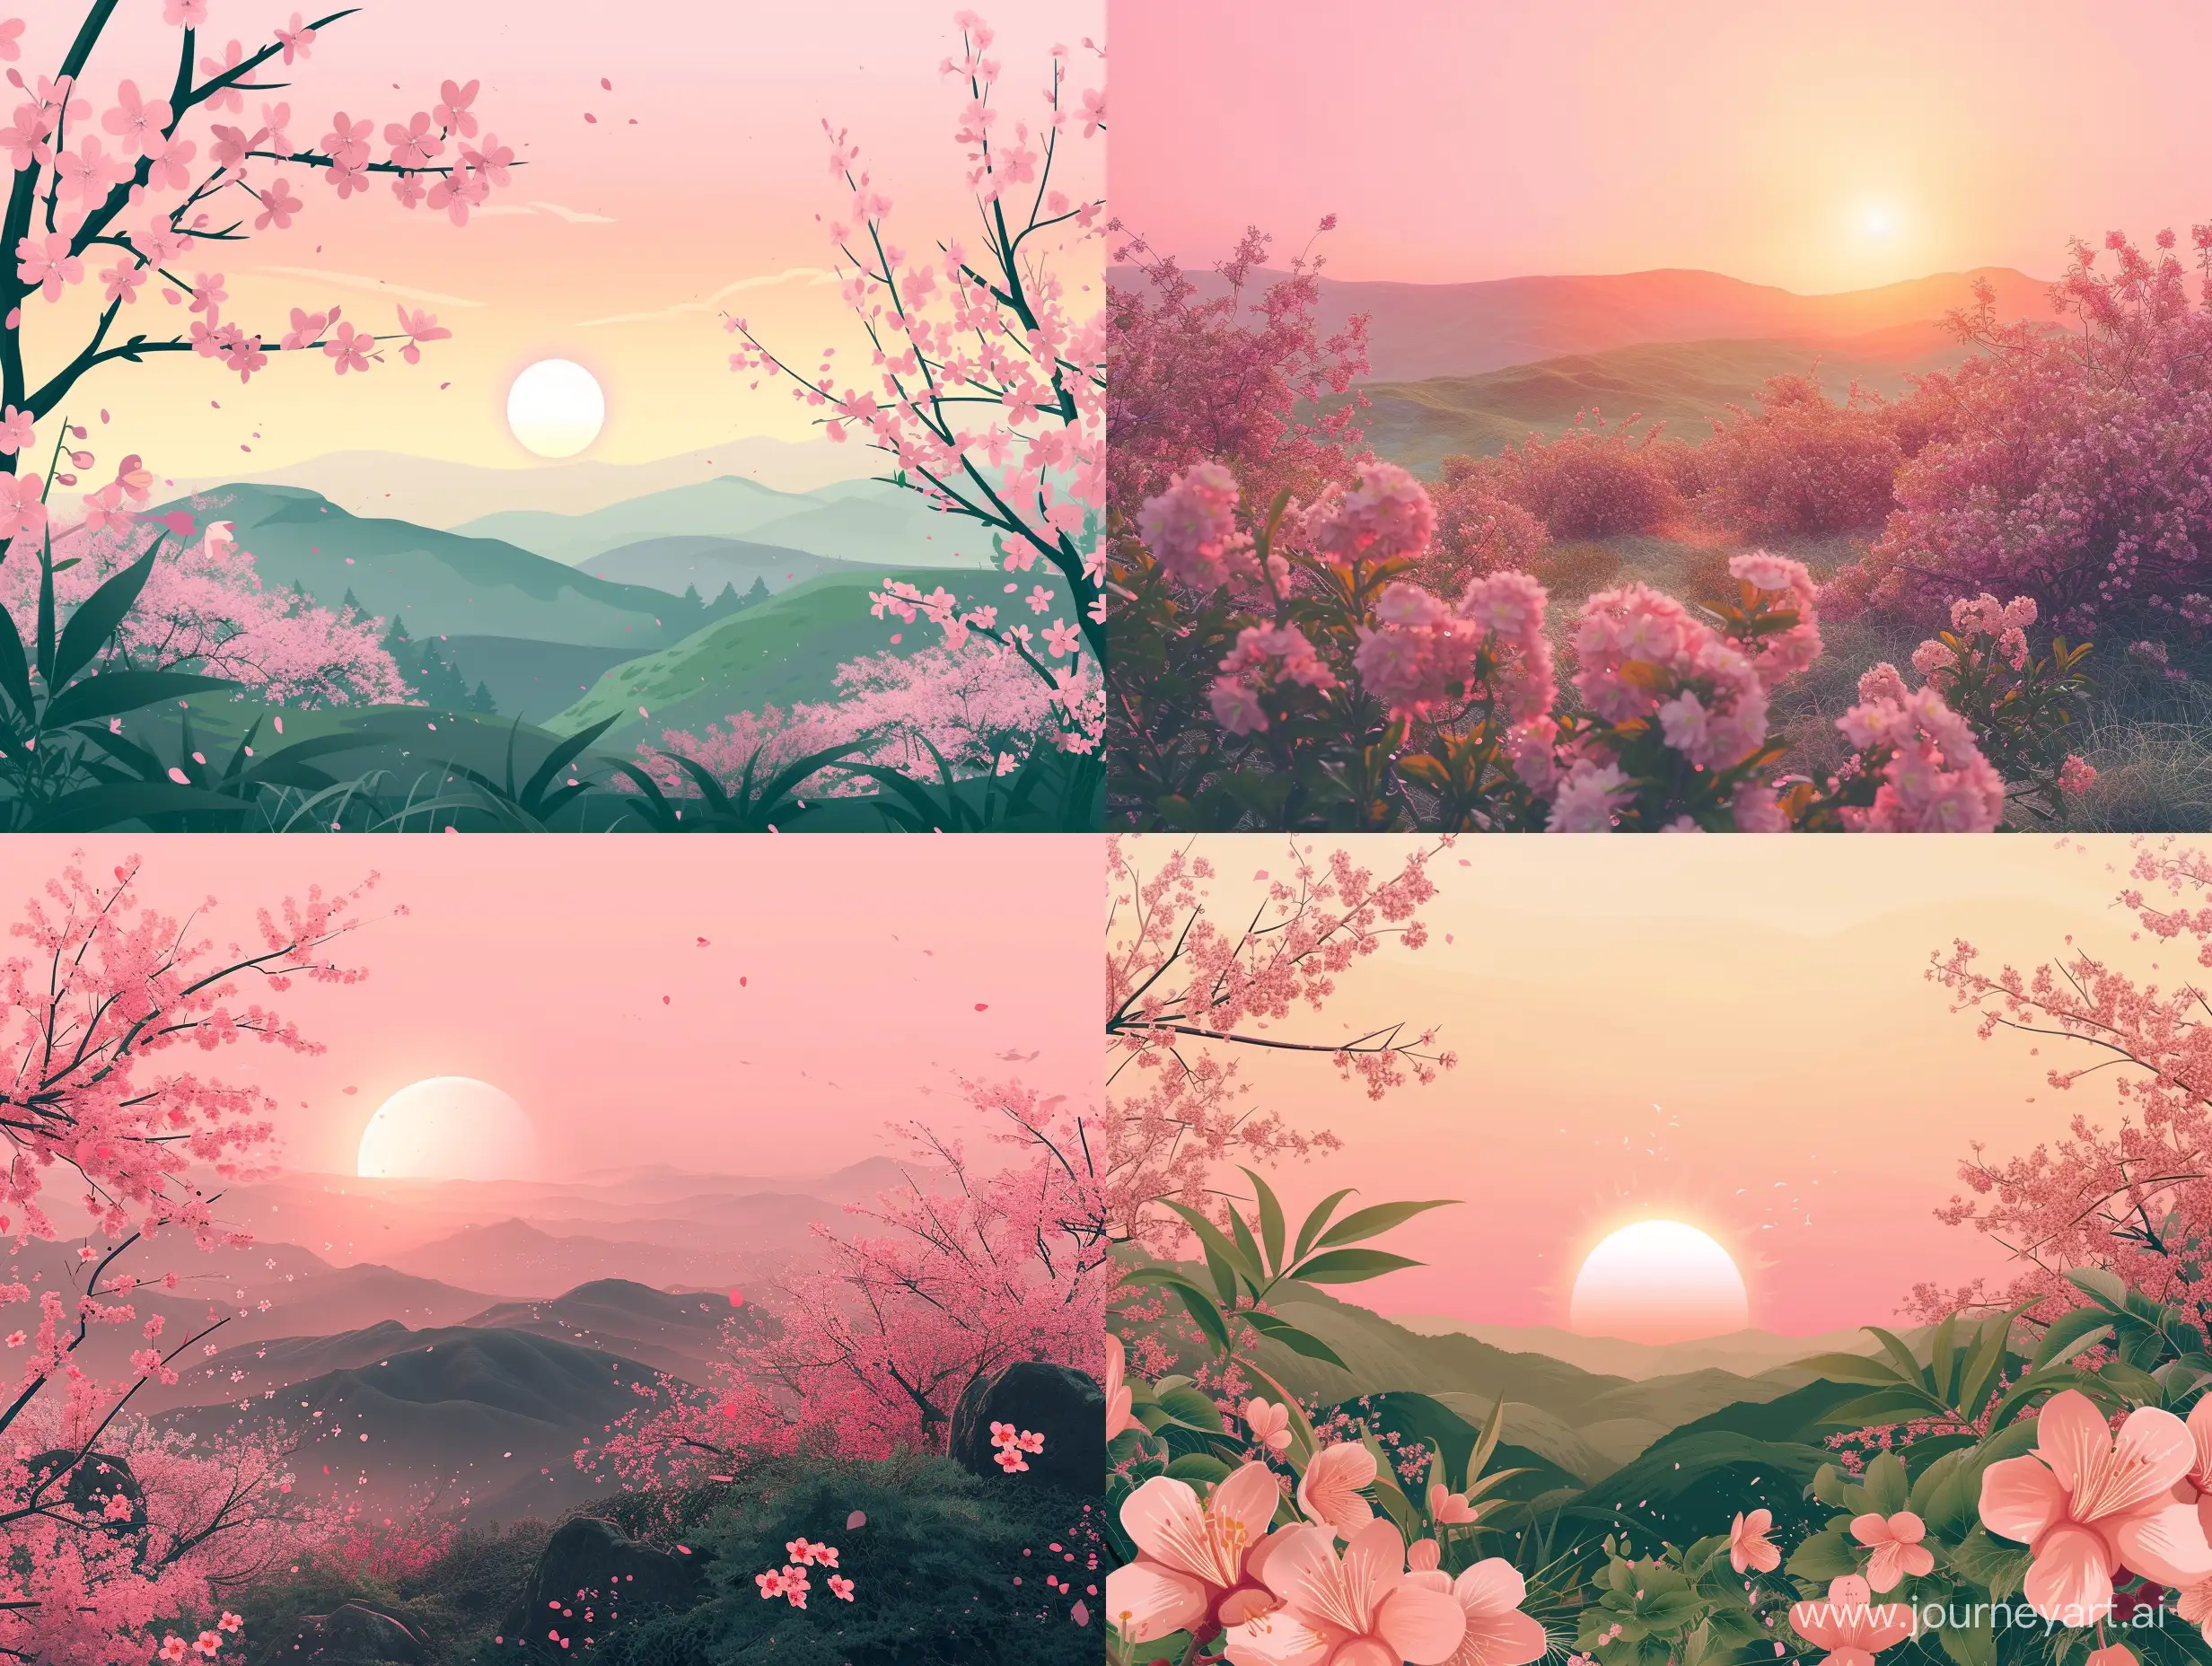 spring blossoms landcape with some greenery and warm atmosphere glowing pink sun and hills